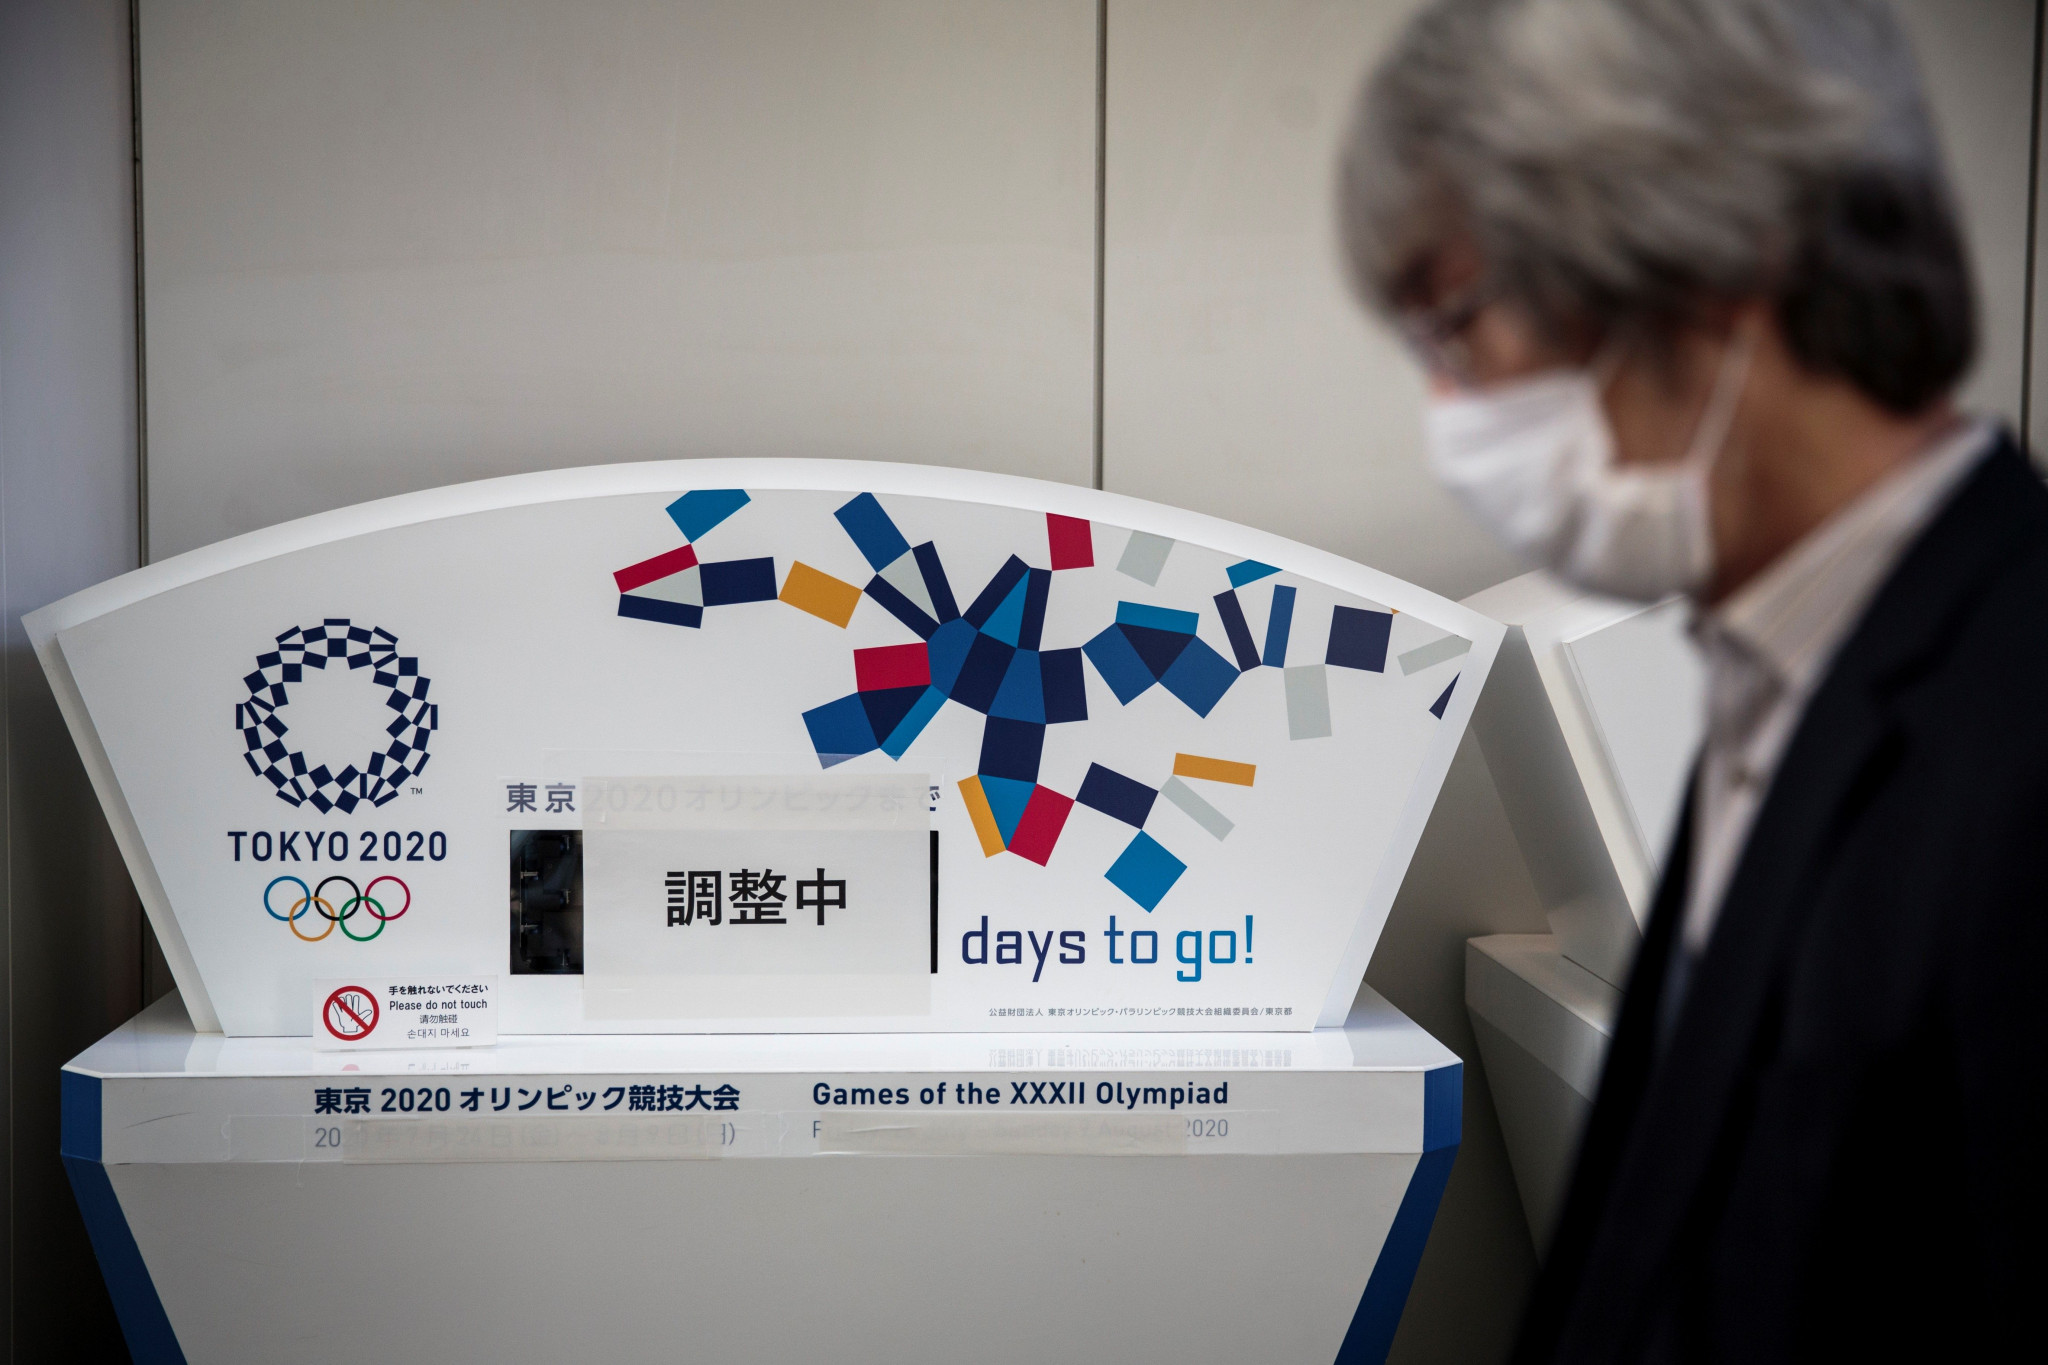 Sixth positive COVID-19 test among Tokyo 2020 staff announced